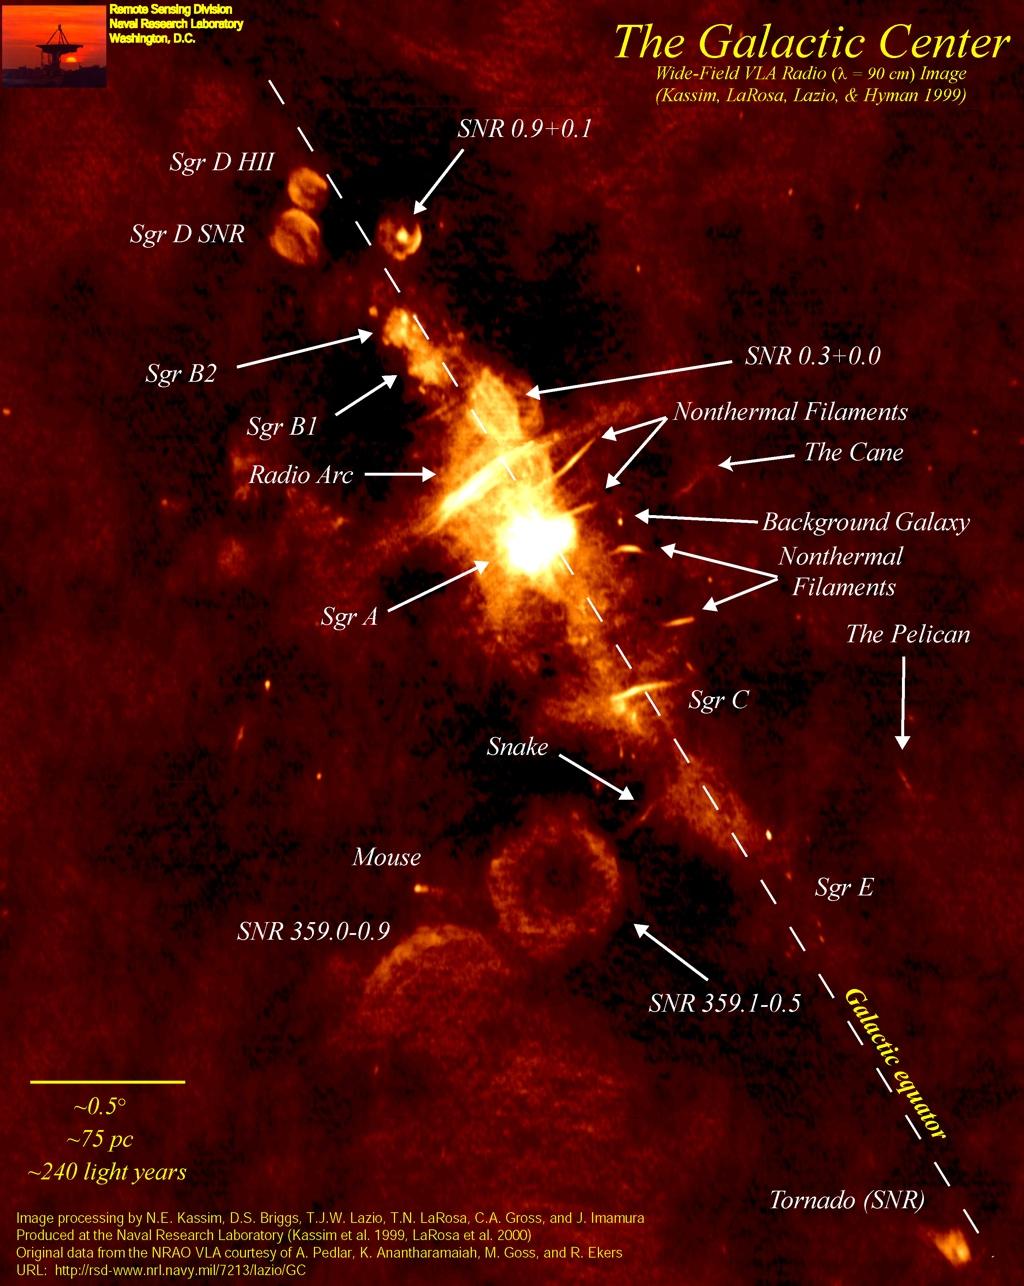 Galactic center brightest, but diﬃcult